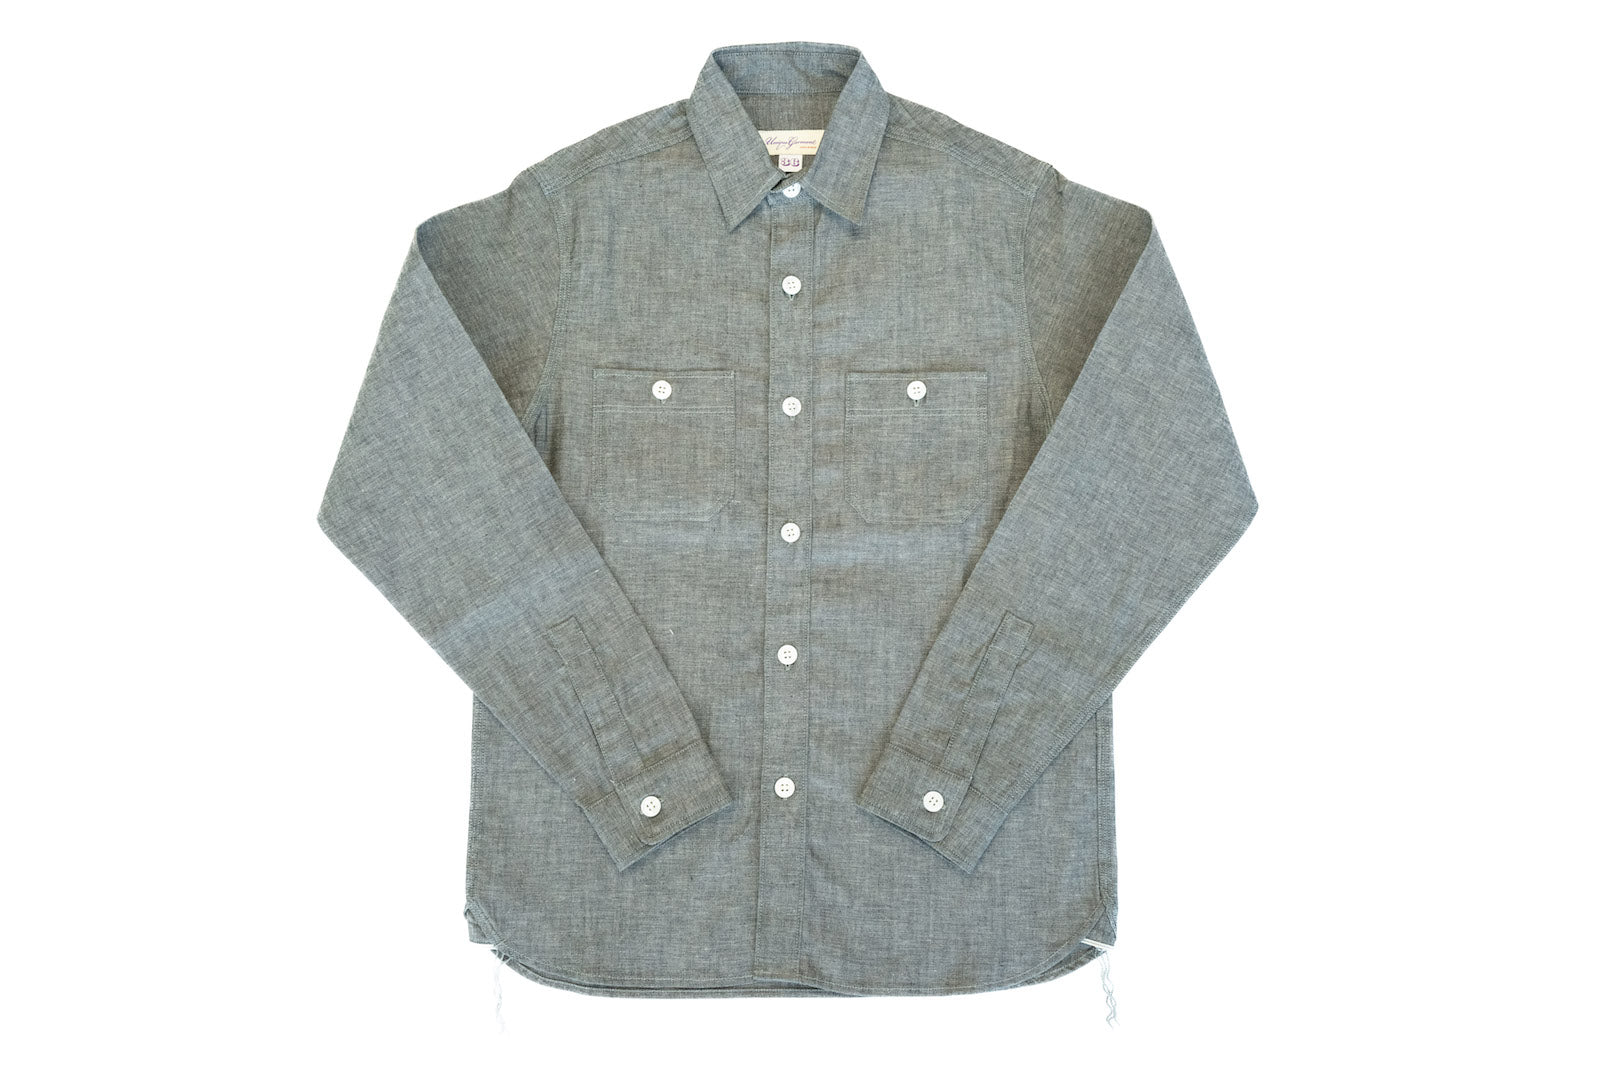 Unique Garment 9oz 'Stanley' Selvage Chambray Work Shirt (Grey)